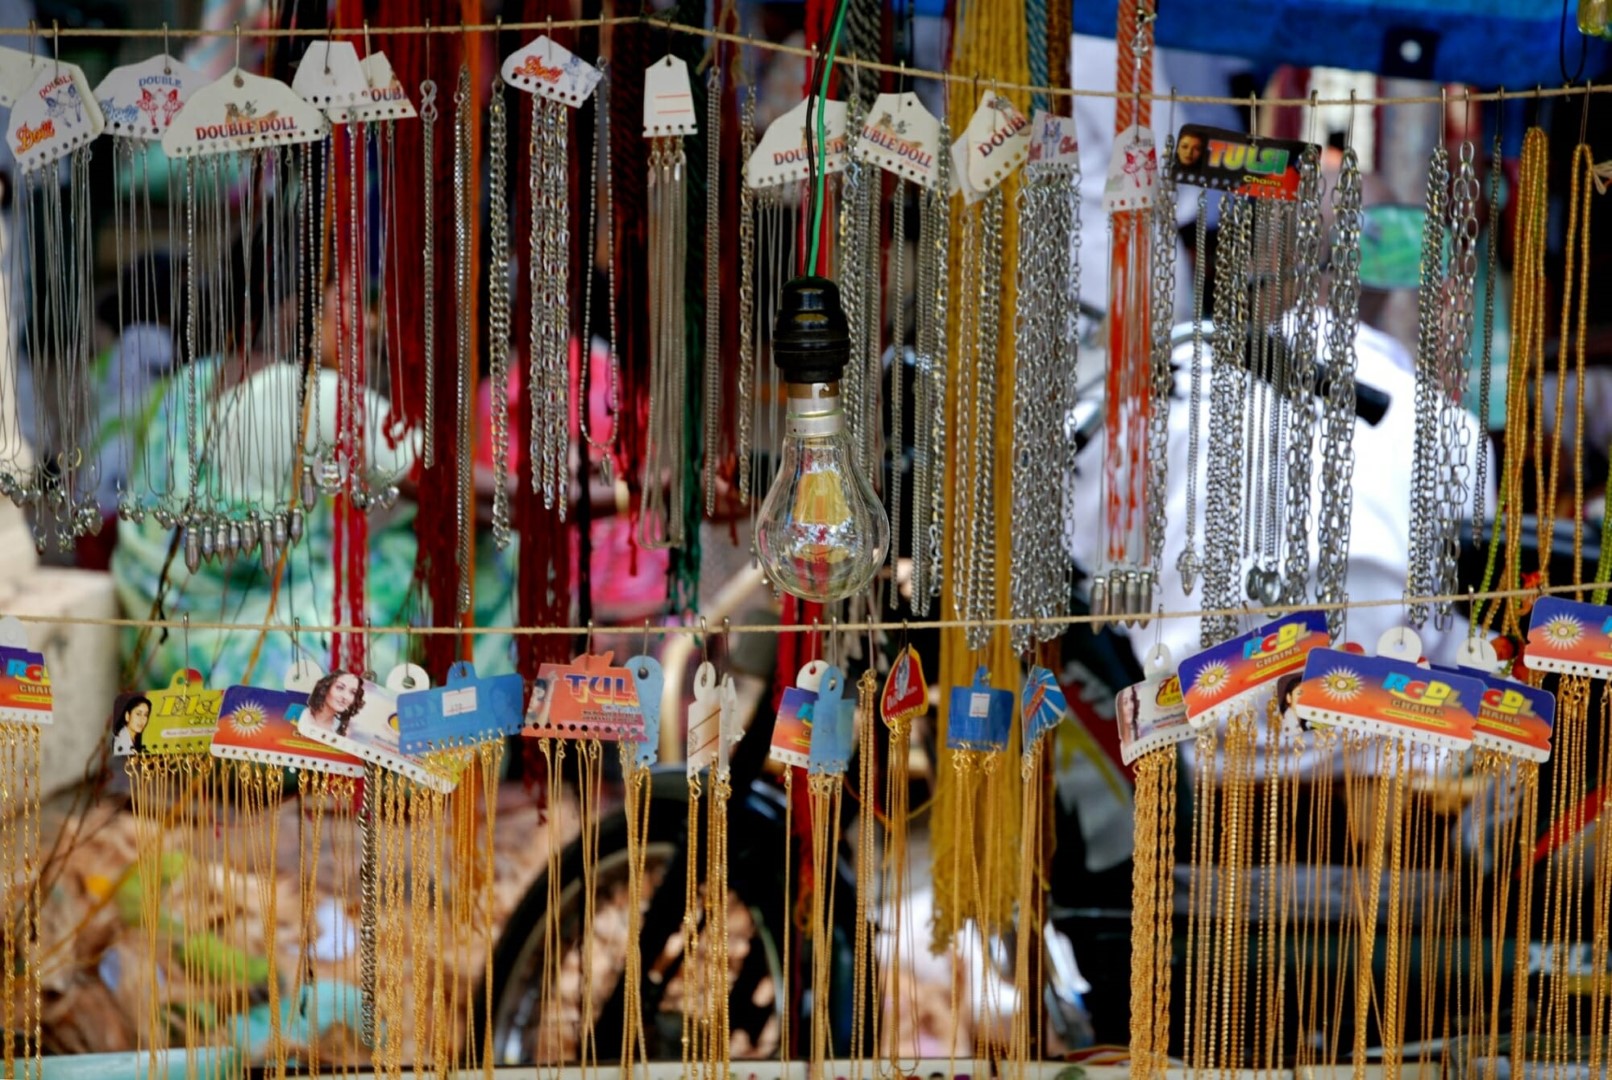 <span style="font-weight:normal;">At the Fair, Tamil Nadu, 2008</span>